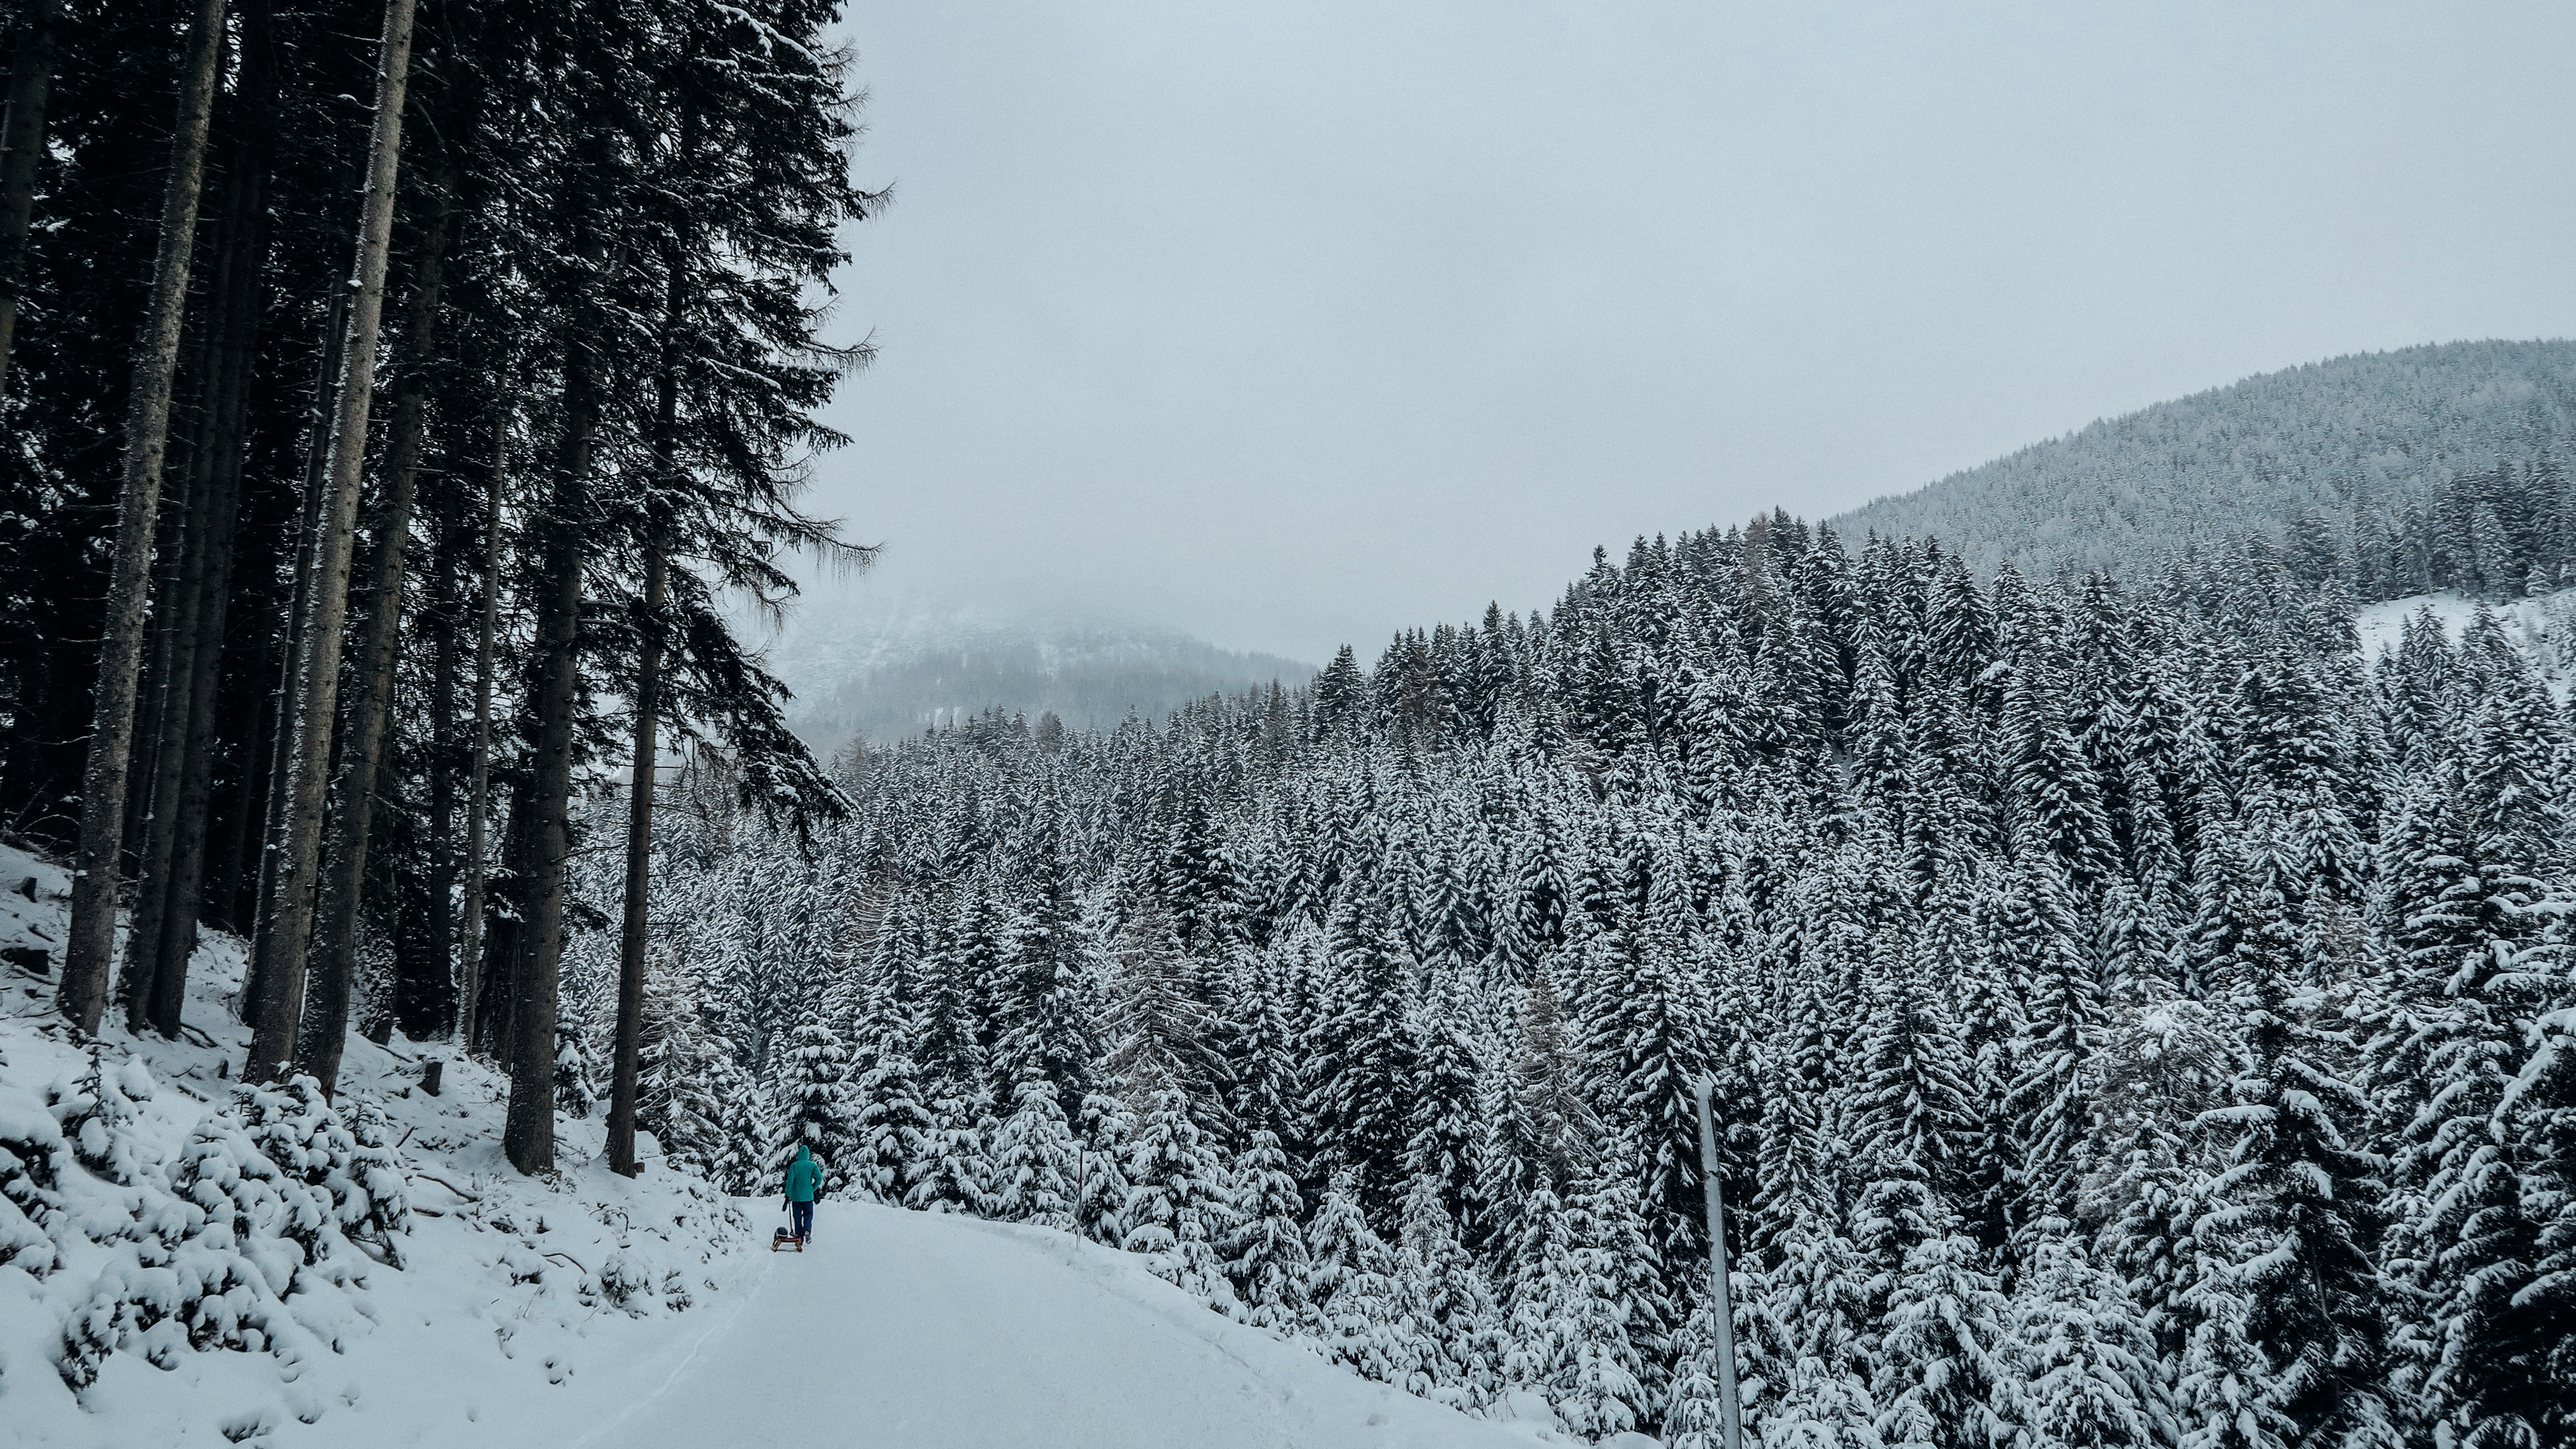 Snowy Forest - Free Stock Photos | Life of Pix